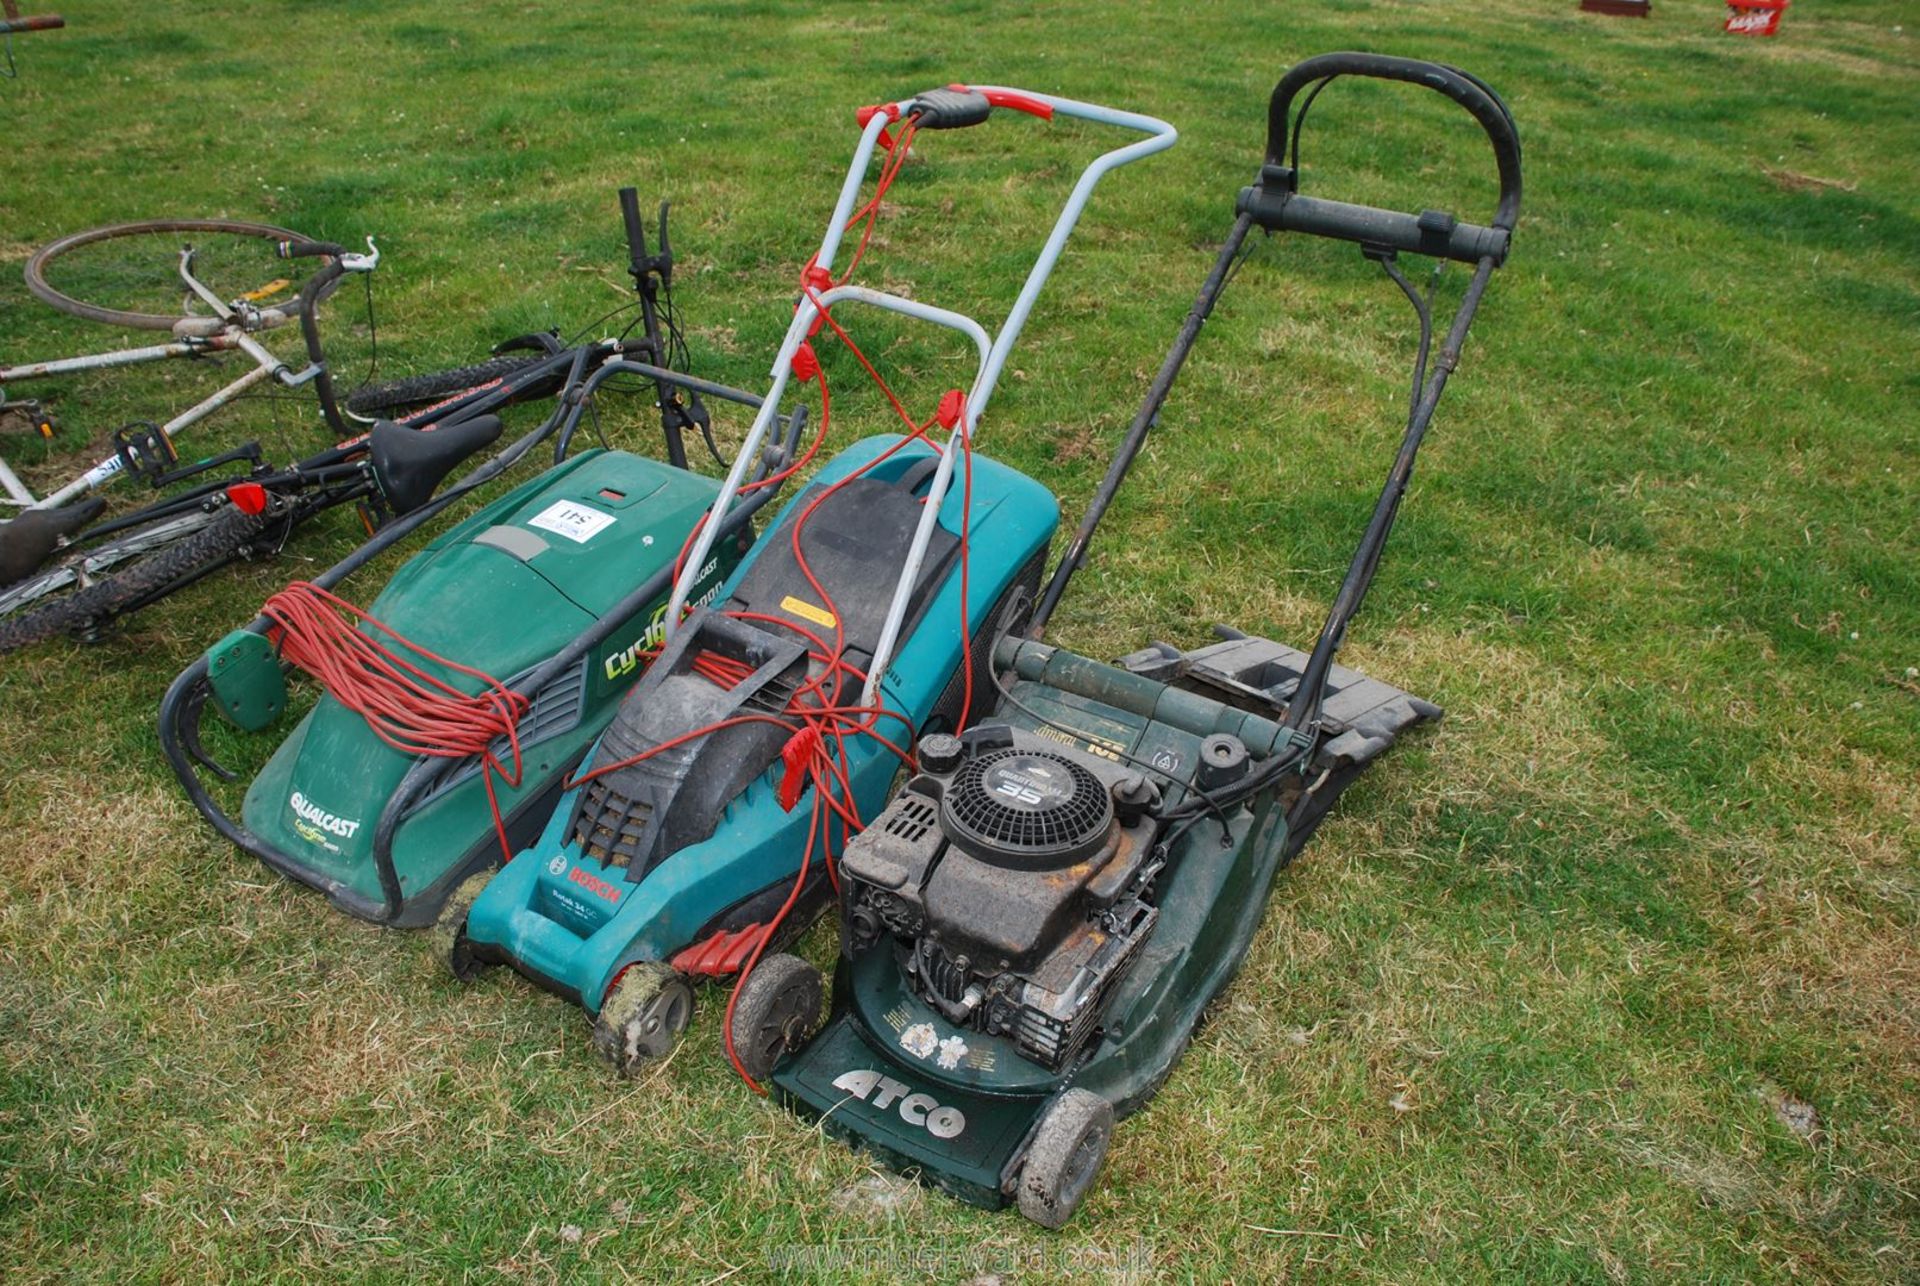 Two electric lawn Mowers (Bosch & Qualcast) and an Atco petrol rotary mower.